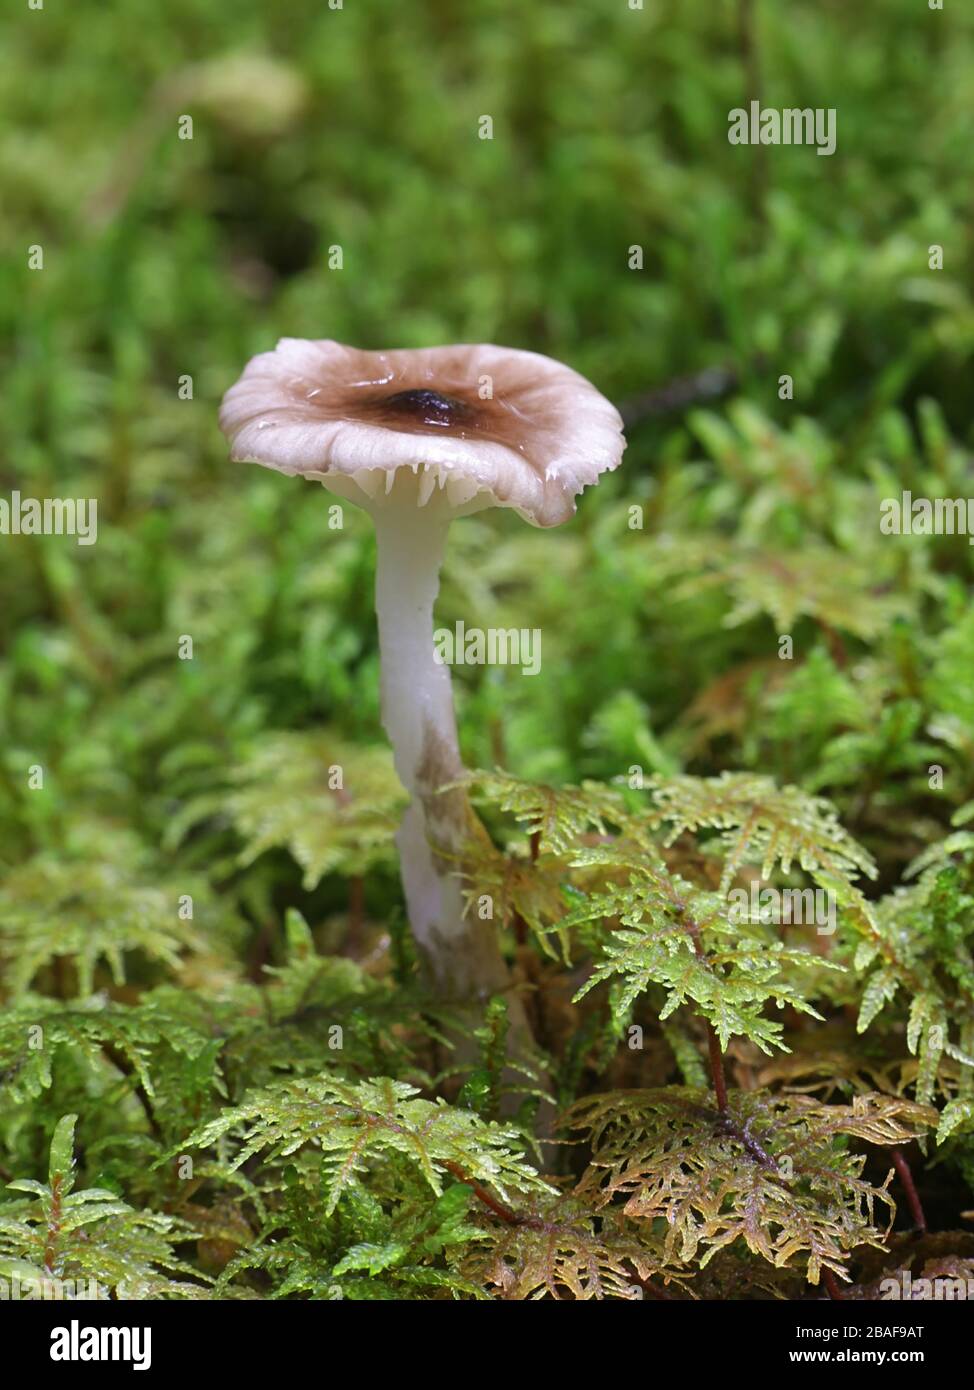 Hygrophorus olivaceoalbus, known as the olive wax cap, wild mushrooms from Finland Stock Photo